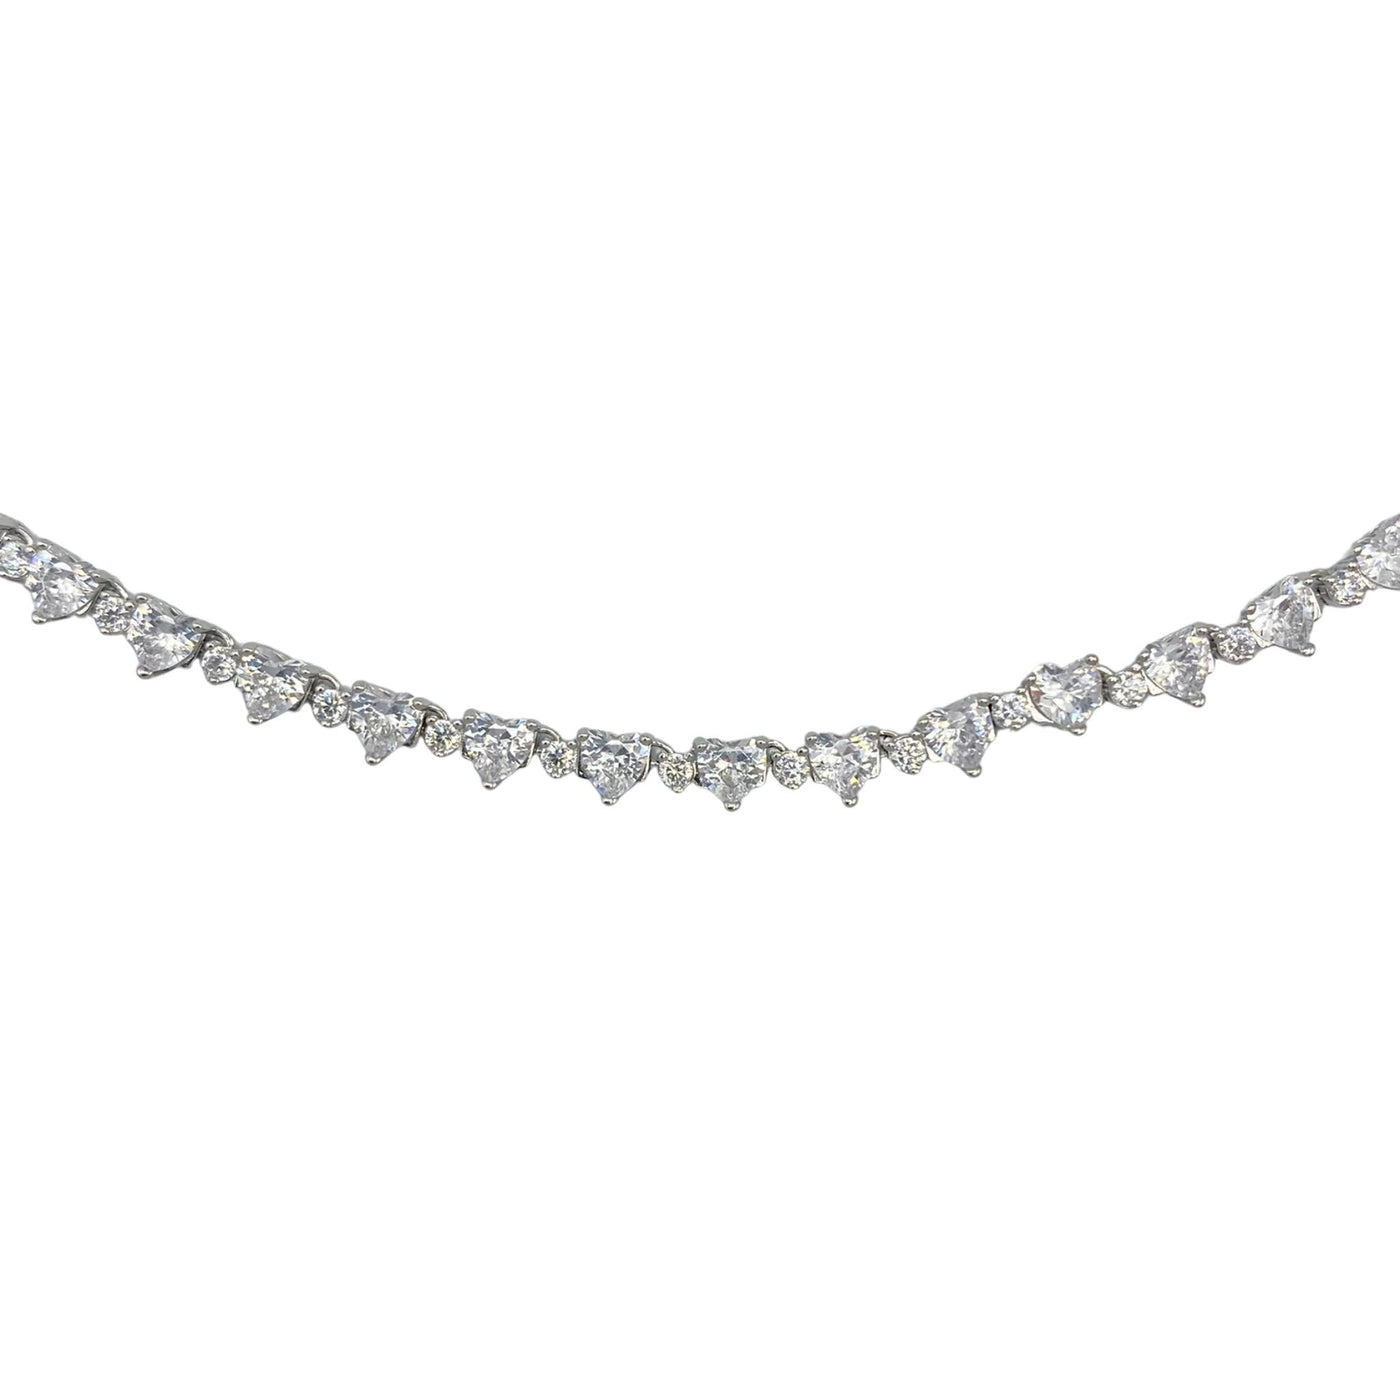 Silver tennis bracelet with hearts